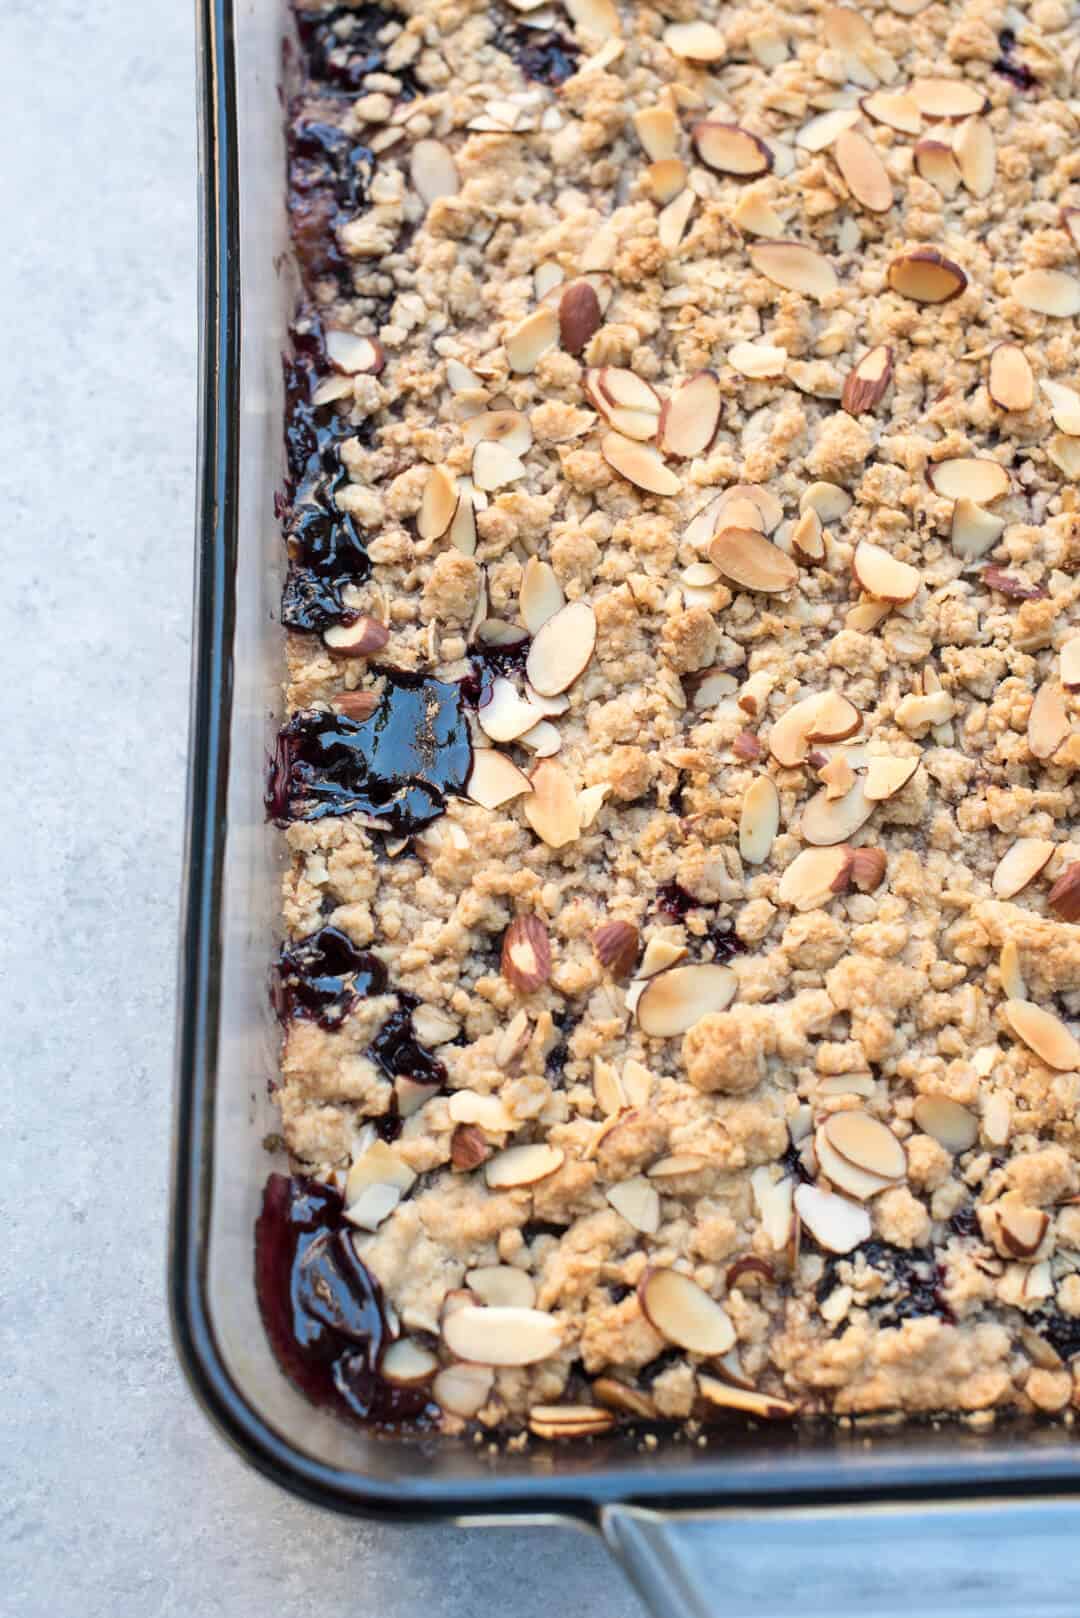 A close up image showing the edges of the baked cherry crisp.